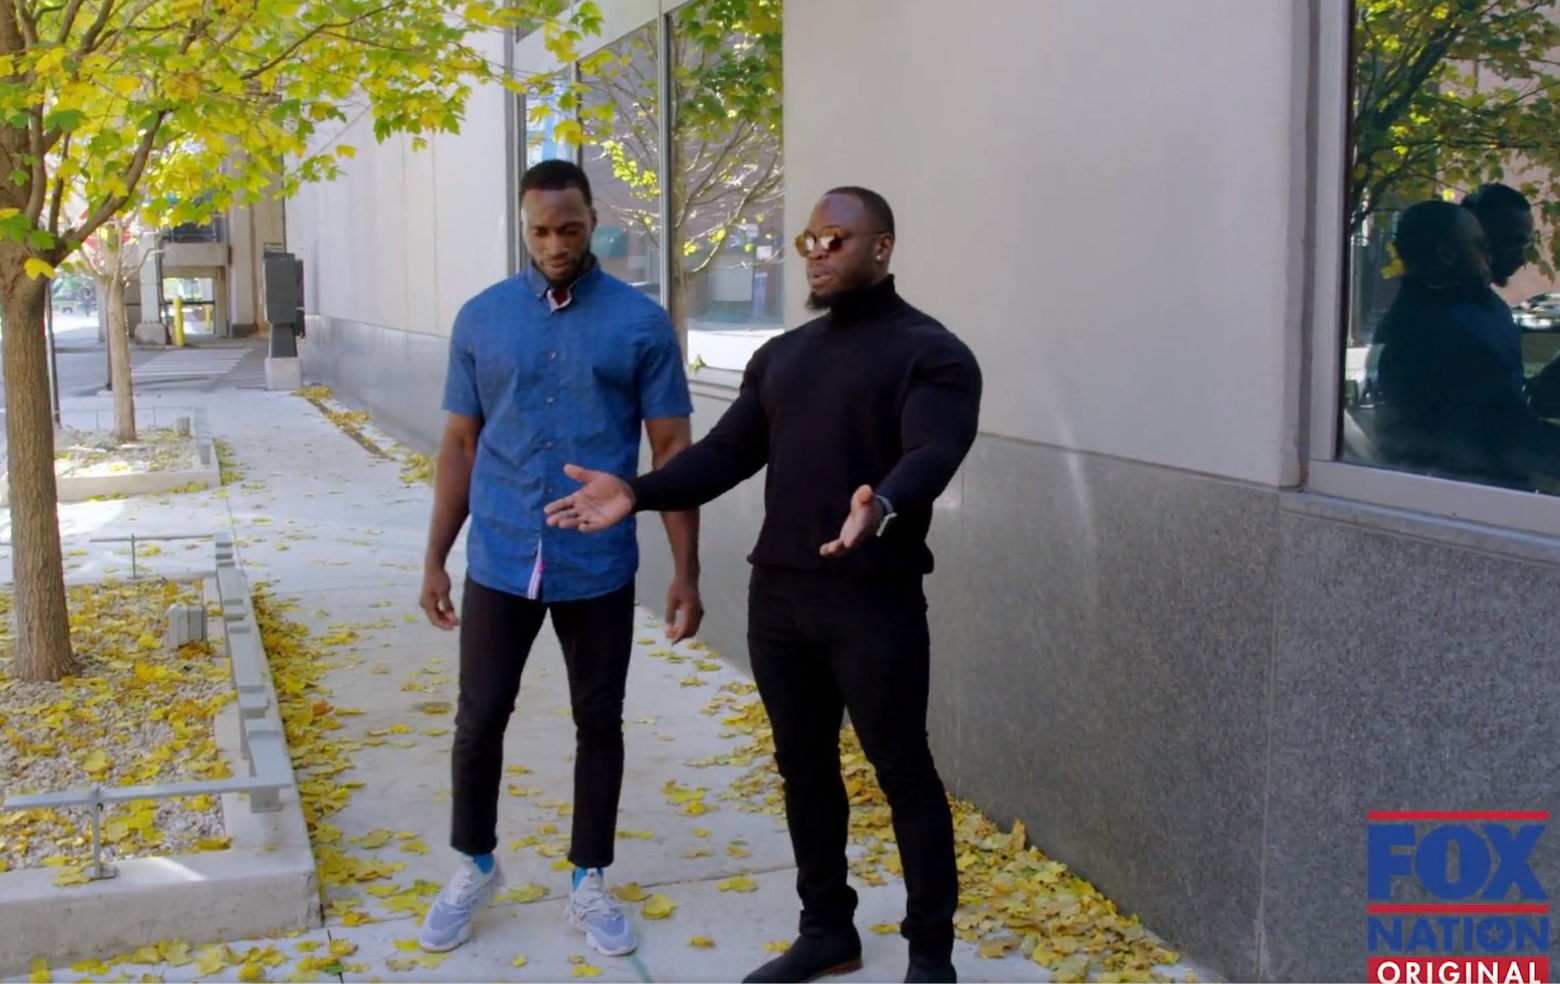 Jussie Smollett re-enactment by the Osundairo brothers